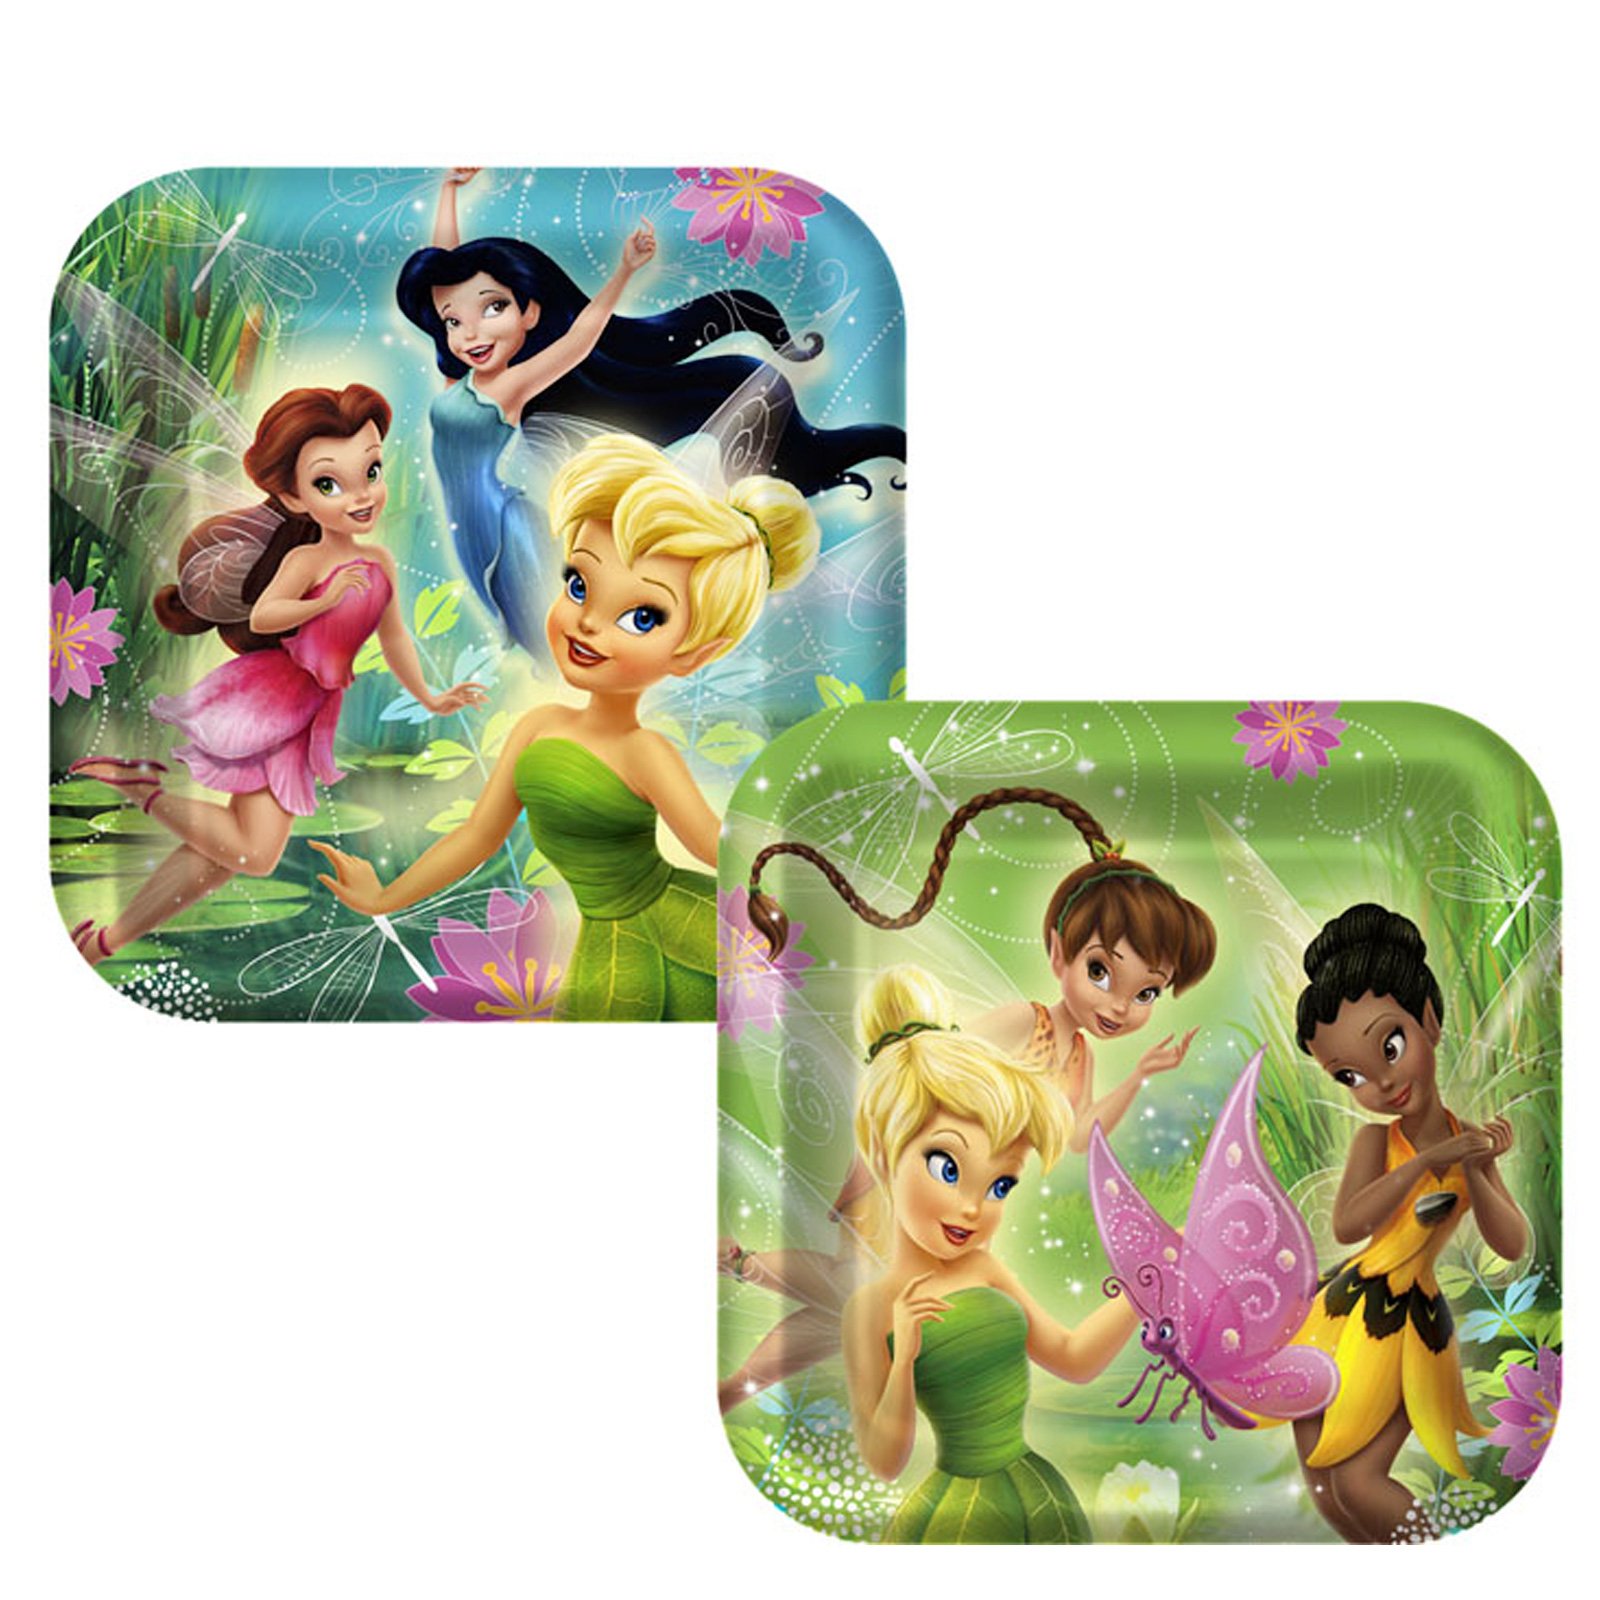 Disney's Fairies Square Dinner Plates Assorted (8 count)